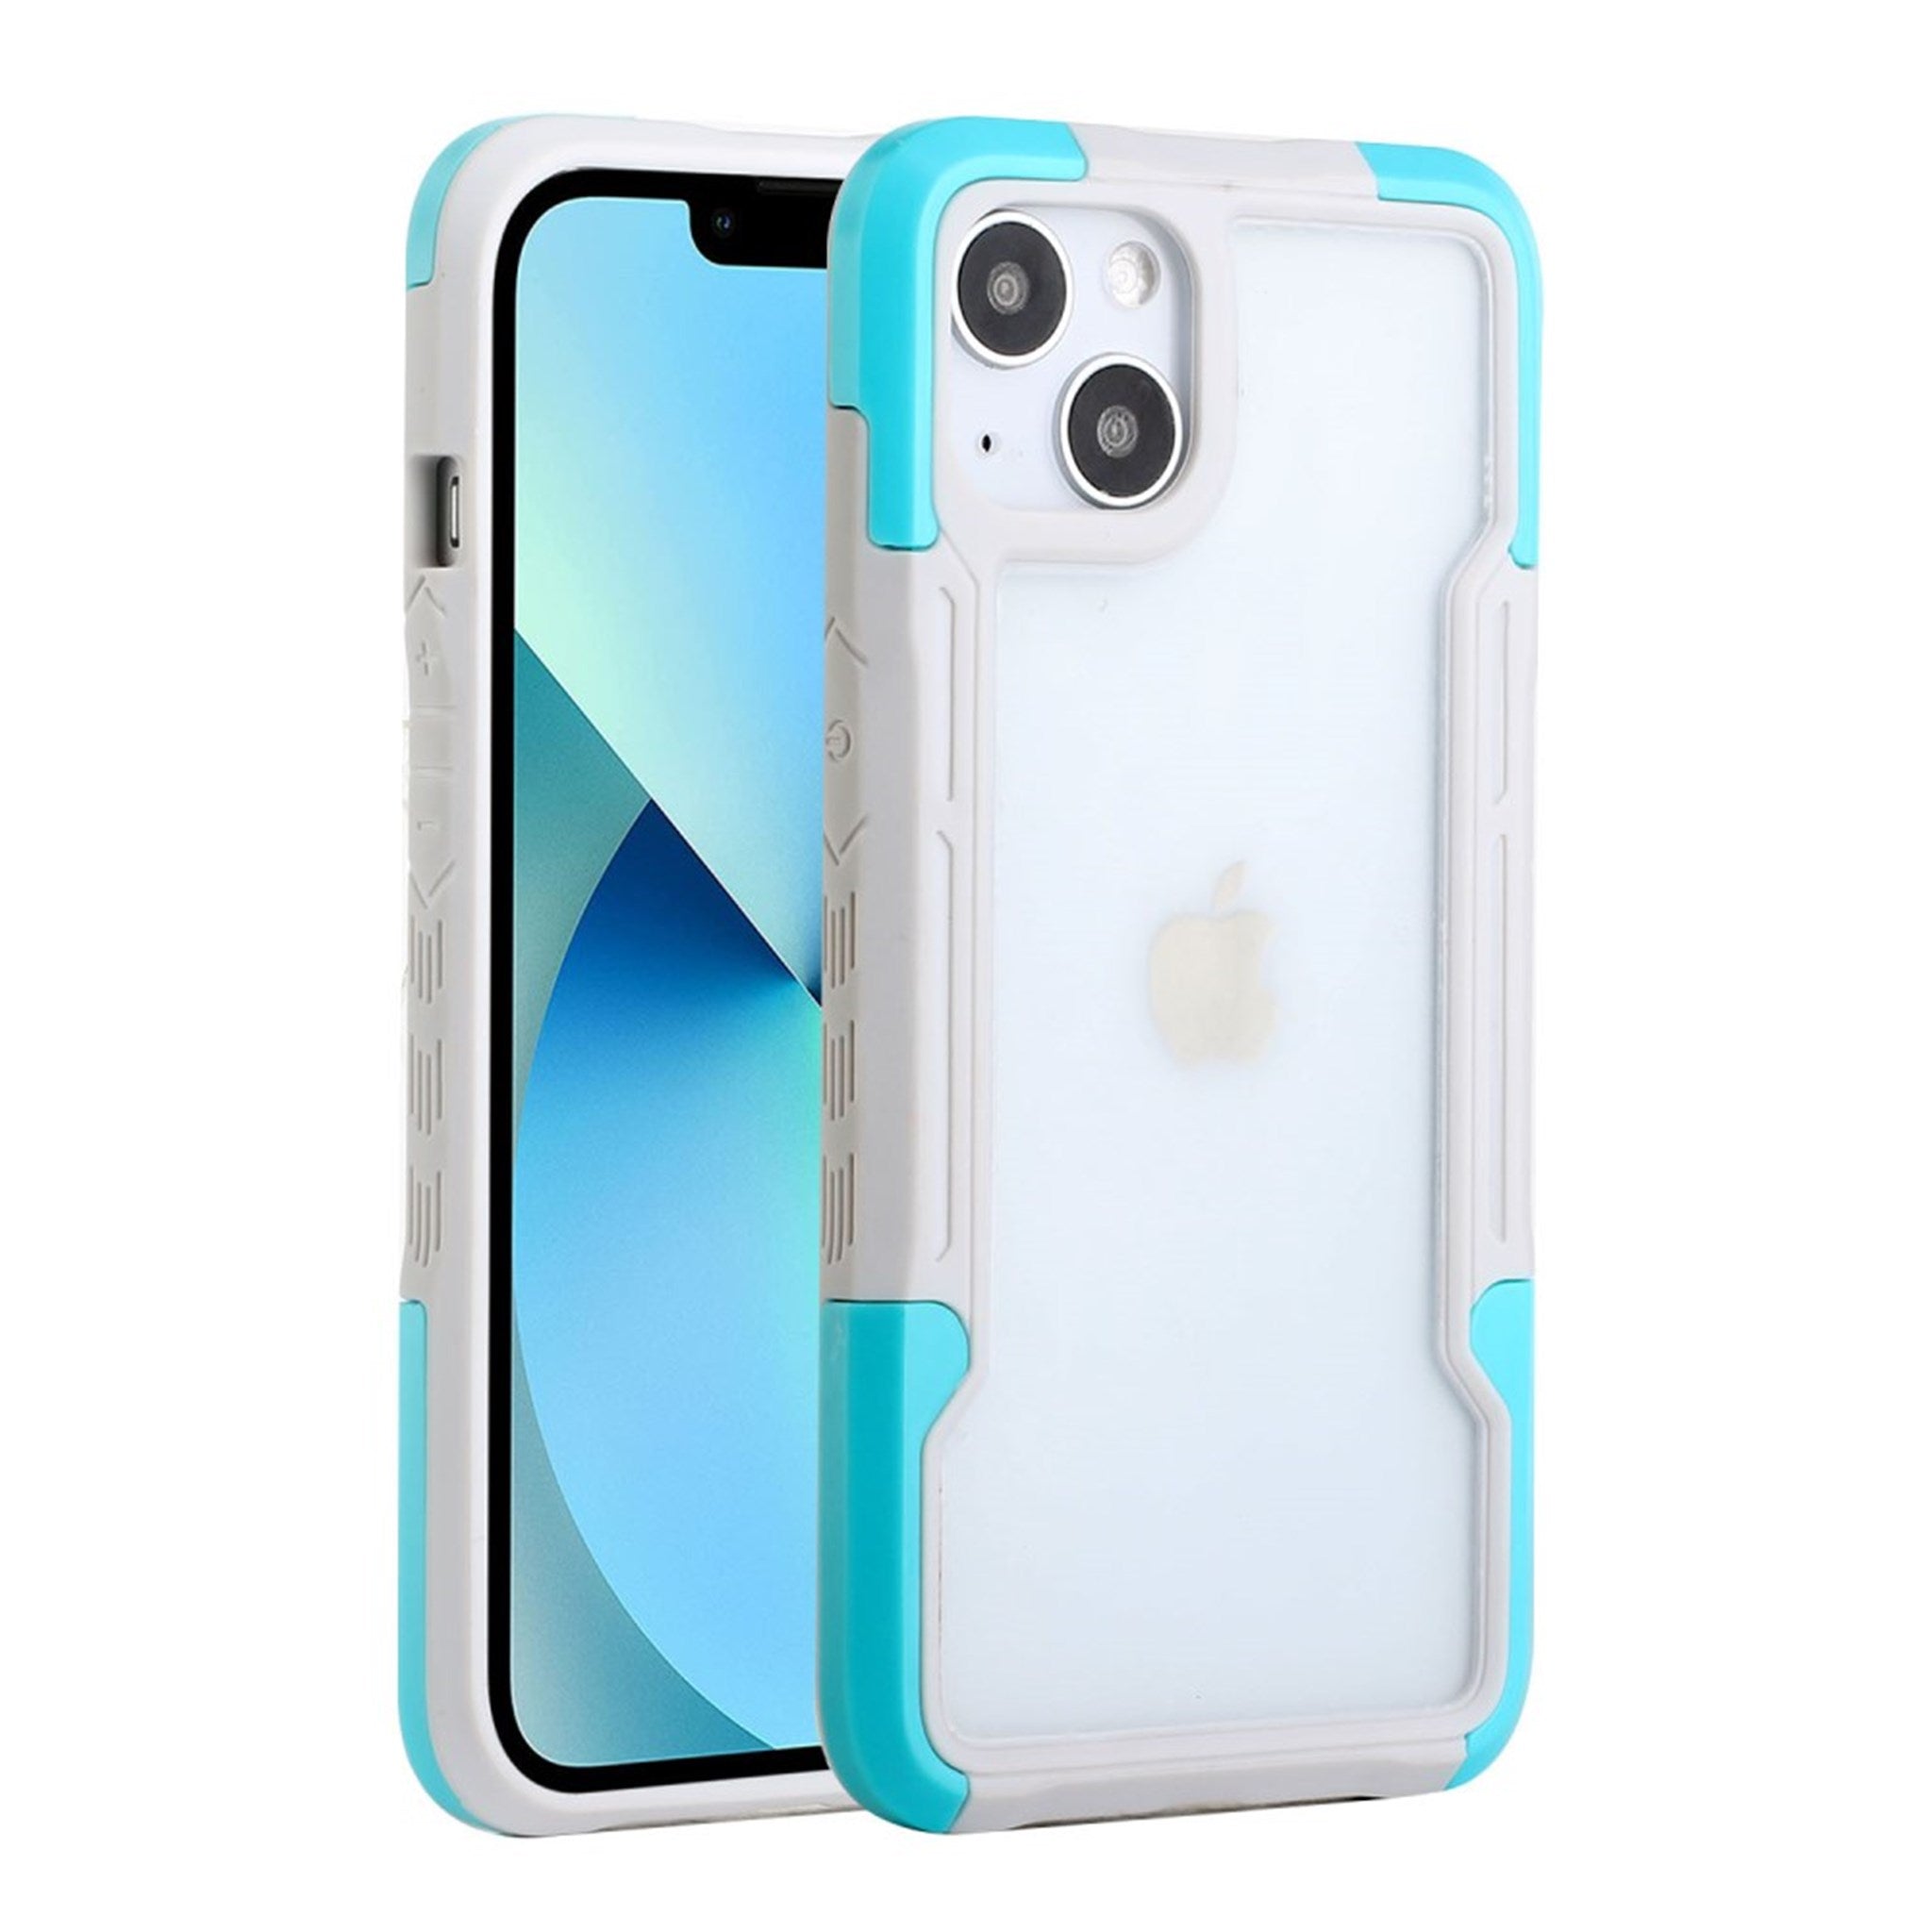 Shockproof protection cover for iPhone 13 - White / Blue